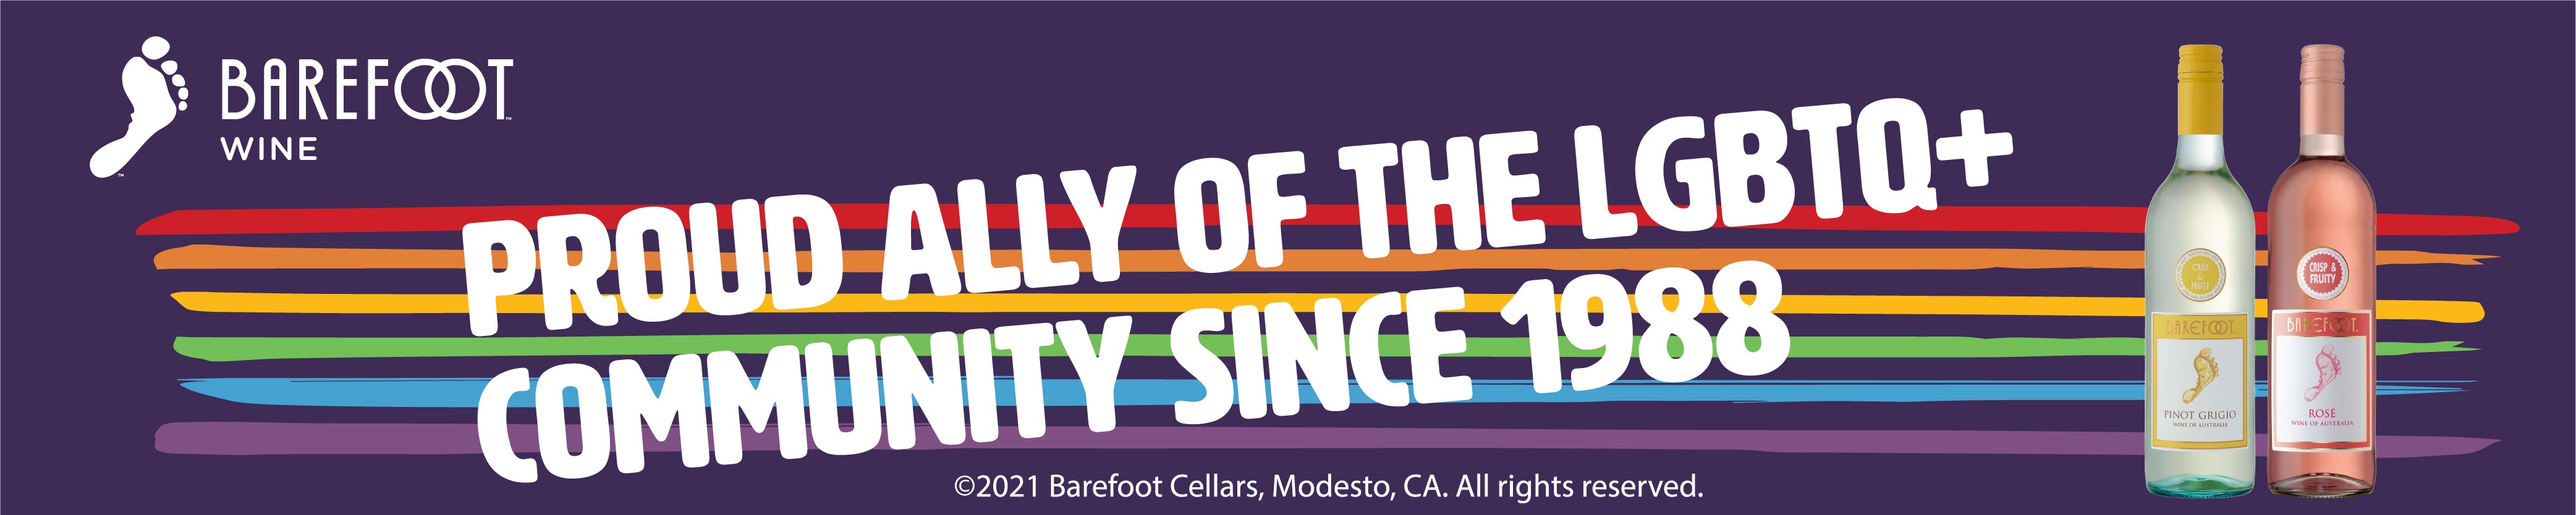 Barefoot Wine banner: Proud ally of the LGBTQ+ community since 1988